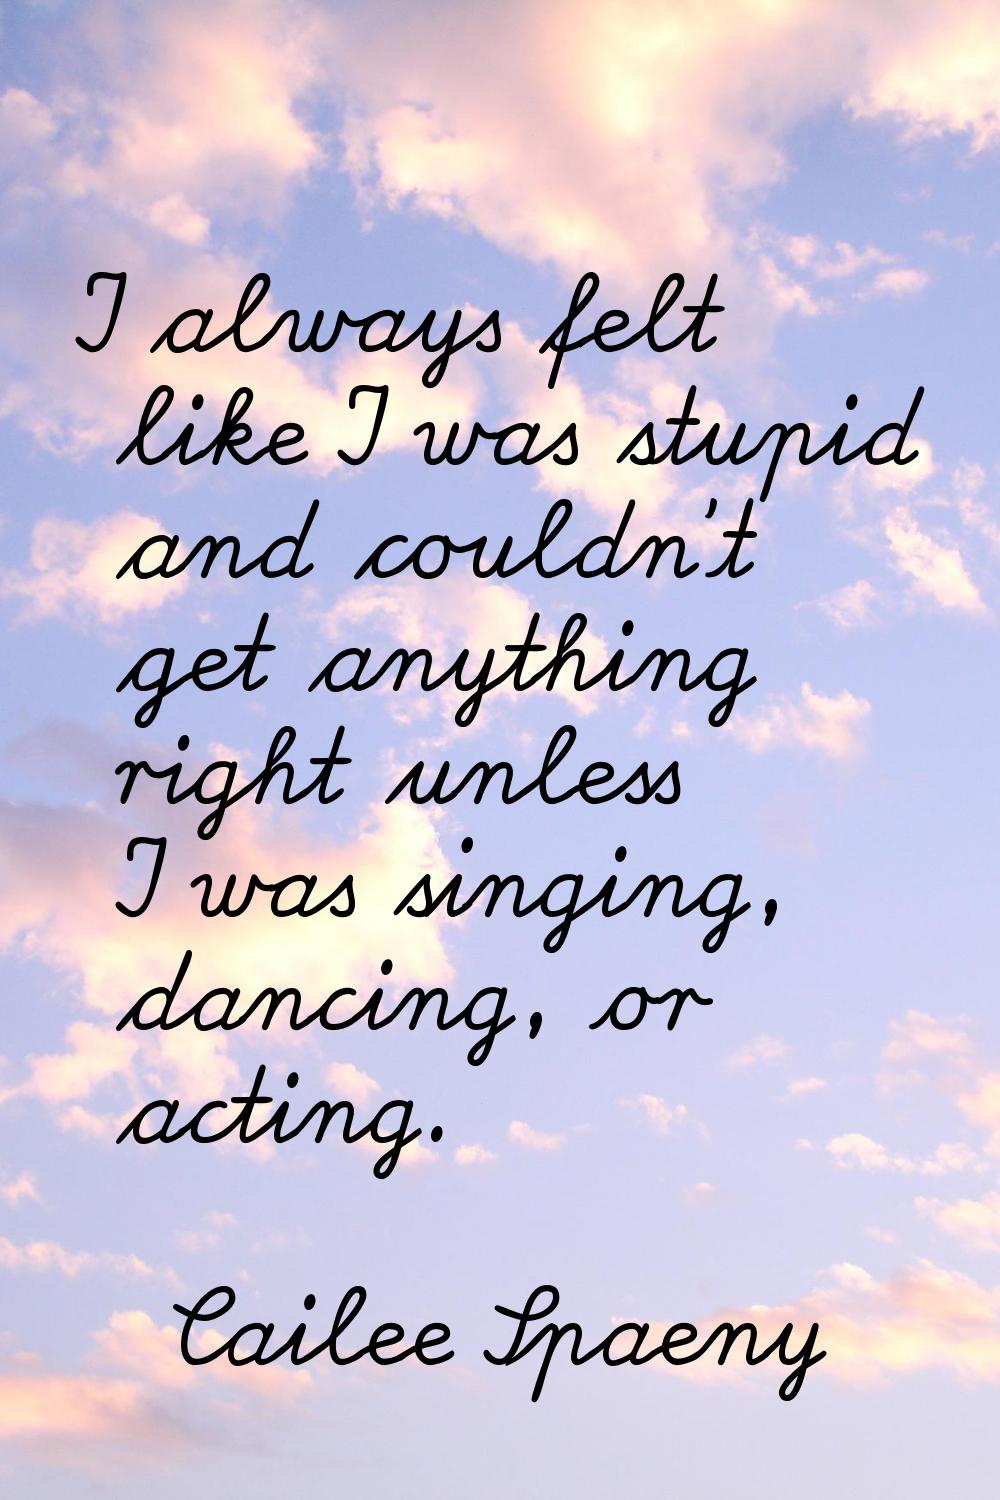 I always felt like I was stupid and couldn't get anything right unless I was singing, dancing, or a